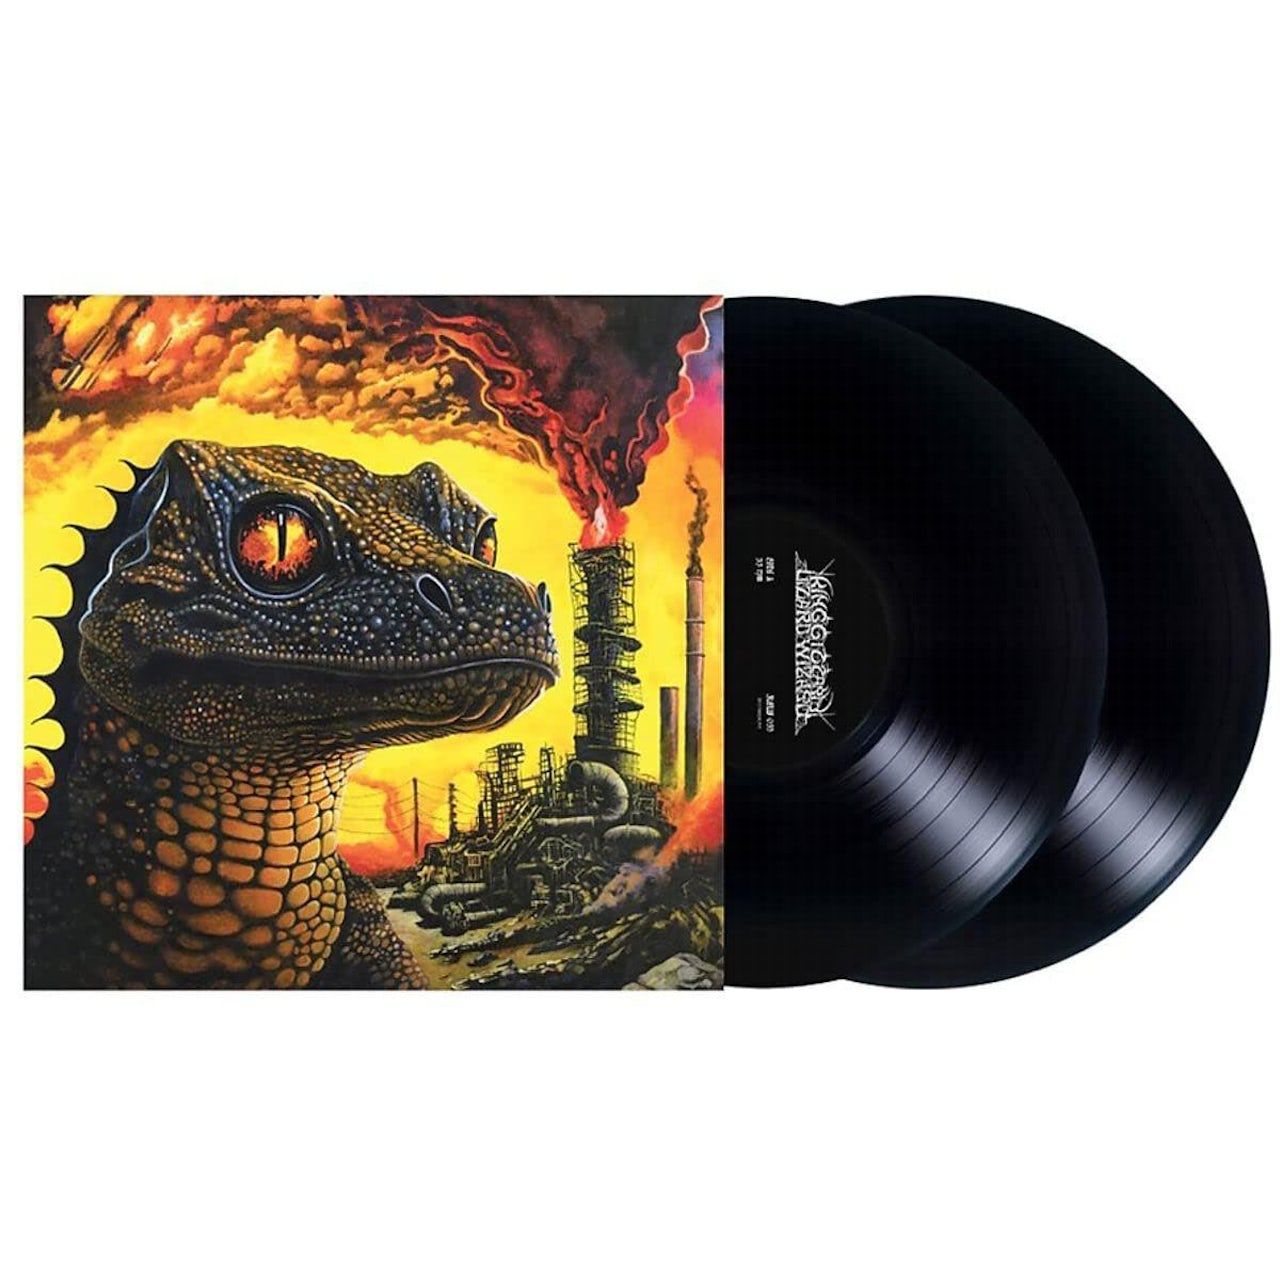 king gizzard and the lizard wizard виниловая пластинка king gizzard and the lizard wizard silver cord 0842812189524, Виниловая пластинка King Gizzard & The Lizard Wizard, Petrodragonic Apocalypse; Or, Dawn Of Eternal Night: An Annihilation Of Planet Earth And The Beginning Of Merciless Damnation (coloured)